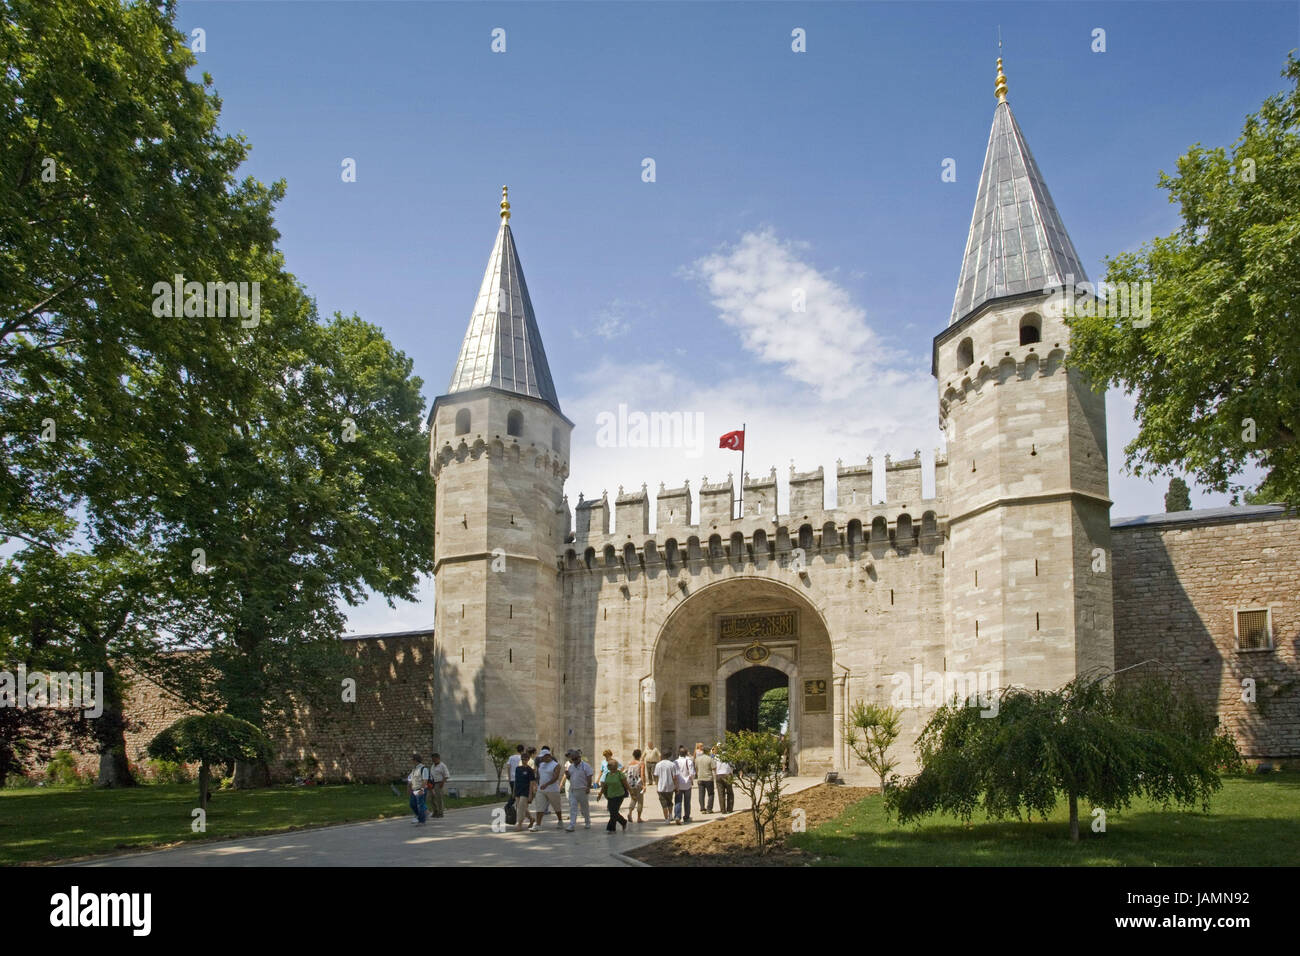 Turkey,Istanbul,Topkapi palace,gate,tourist,no model release,town,city,metropolis,port,culture,input,gate,place of interest,person,tourism,towers,architecture,museum,palace building,defensive wall,palace defensive wall,outside, Stock Photo